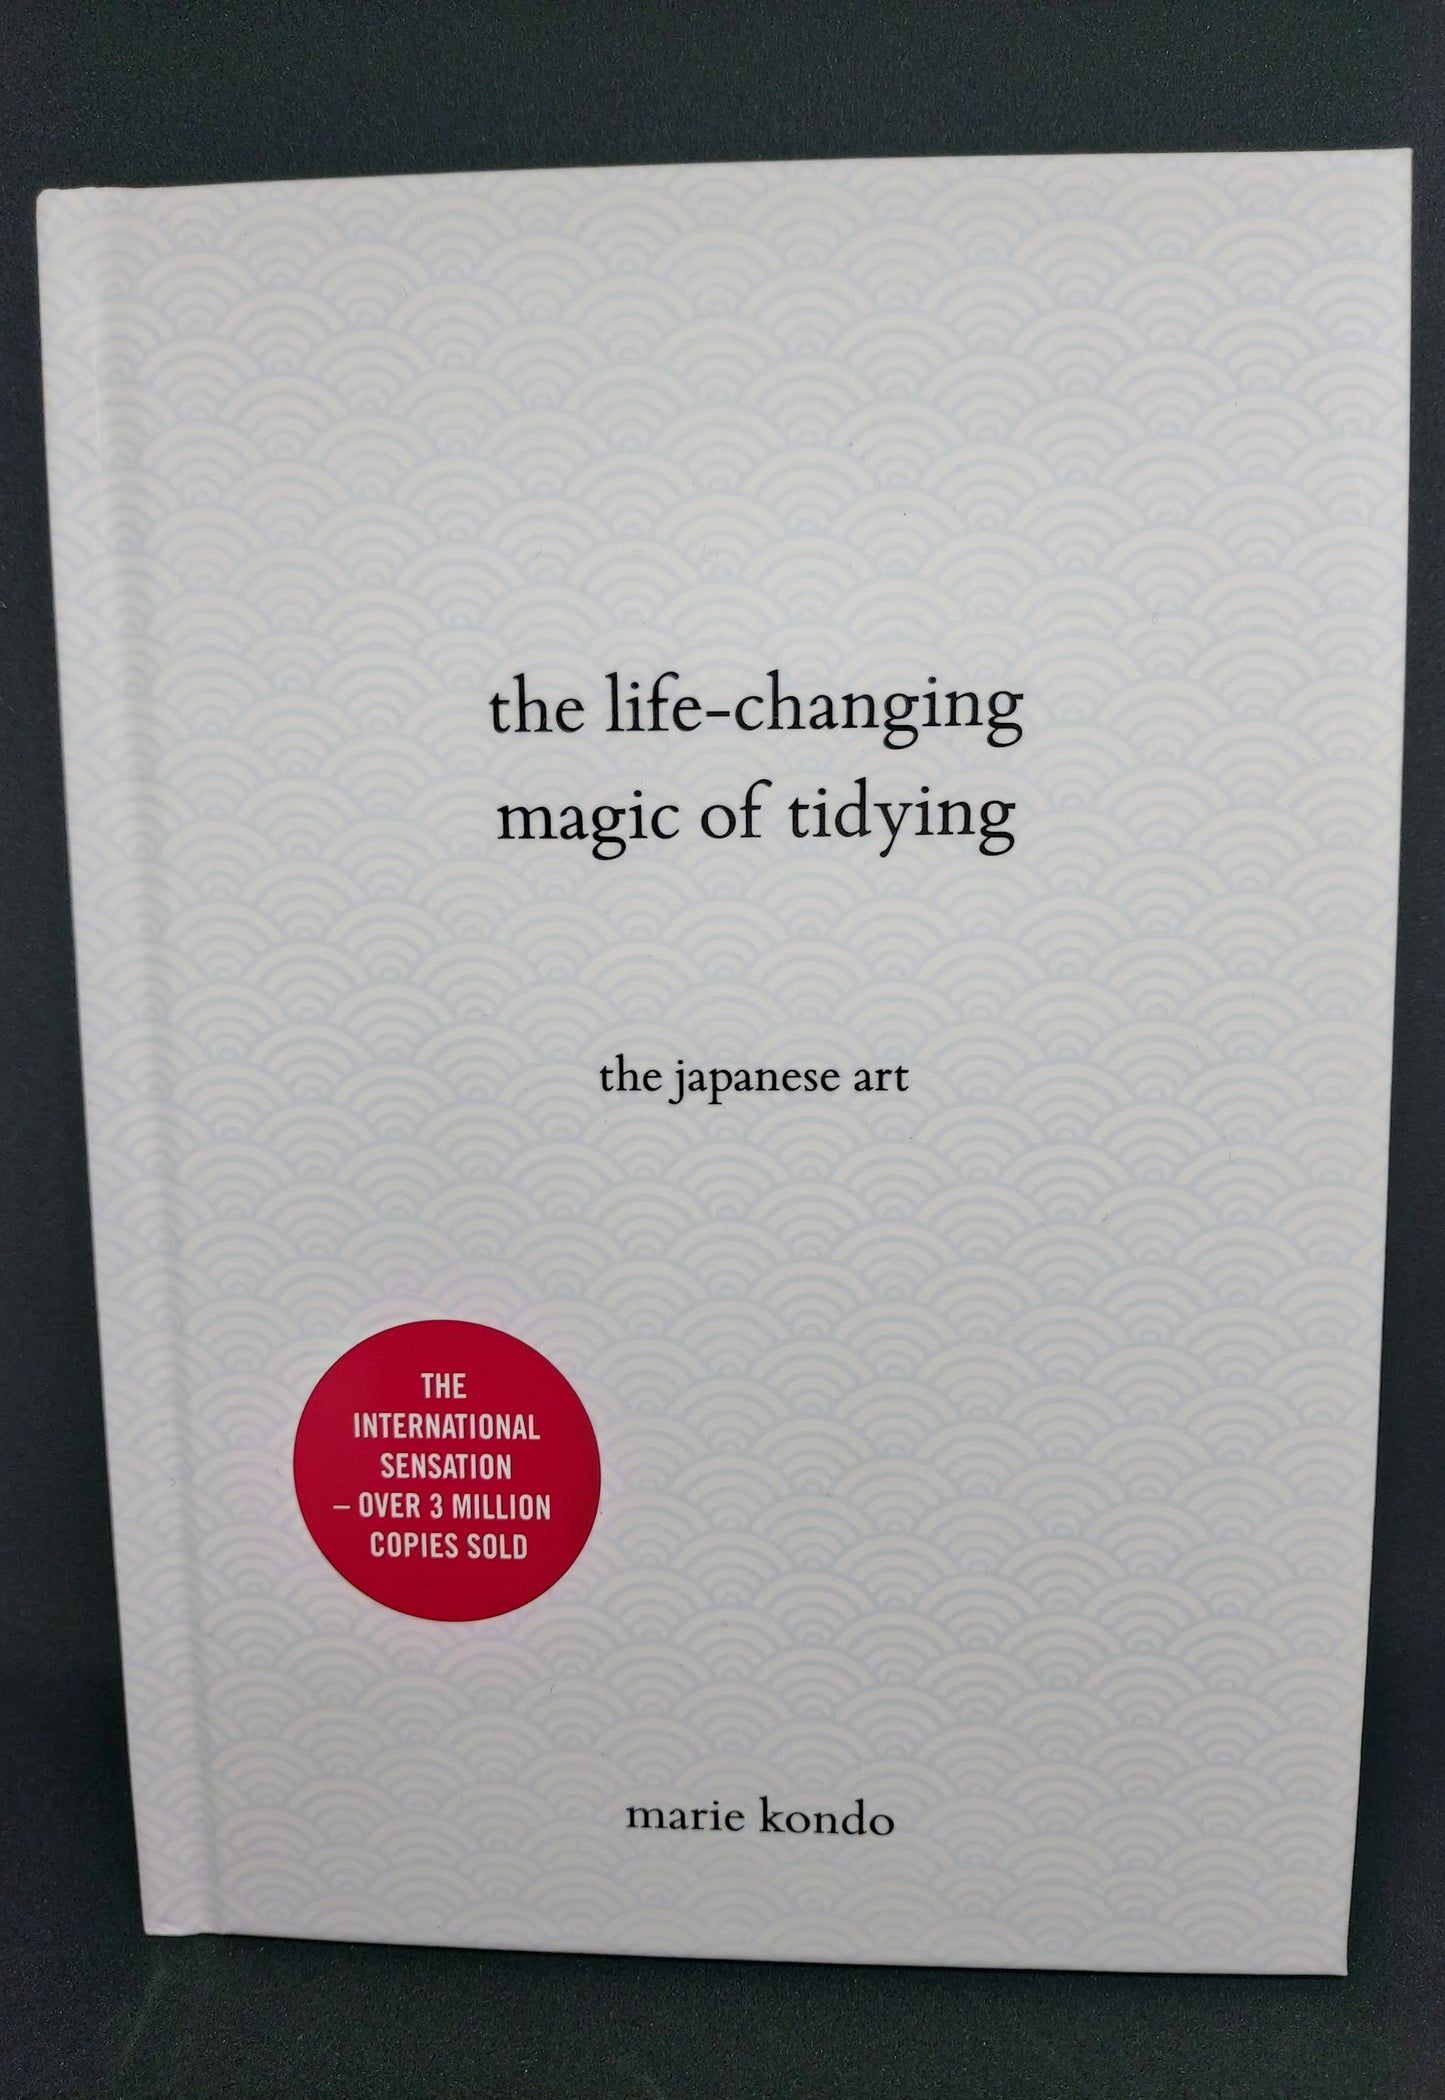 The Life Changing Magic of Tidying by Marie Kondo